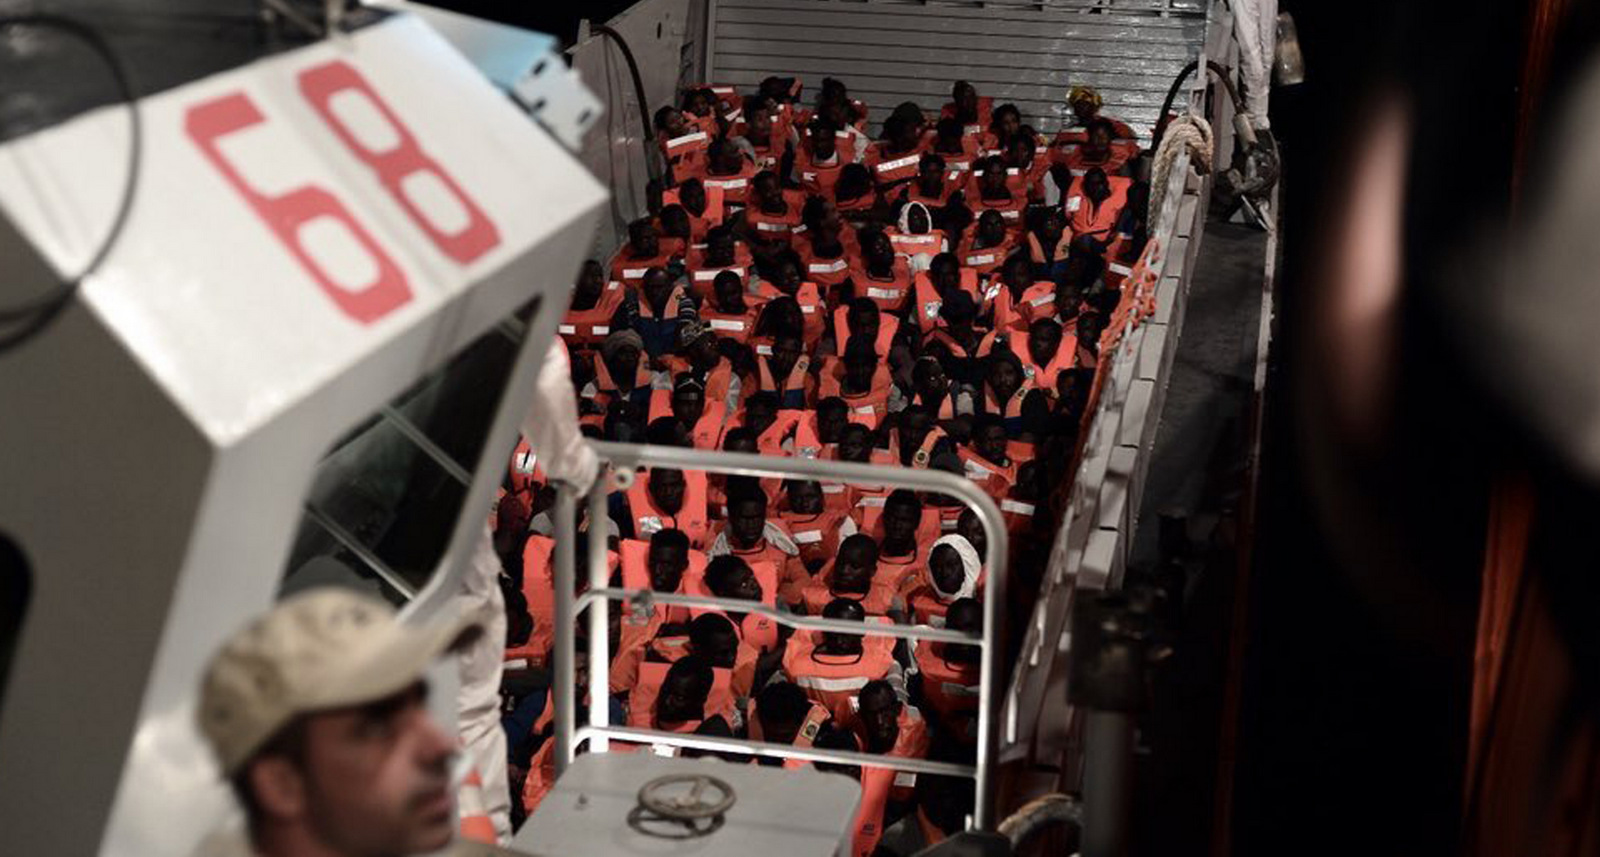 This undated photo released by by French NGO "SOS Mediterranee" on Monday June 11, 2018 and posted on it's Twitter account, shows migrants about to board the SOS Mediterranee's Aquarius ship and MSF (Doctors Without Borders) NGOs, in the Mediterranean Sea. I Kenny Karpov | SOS Mediterranee via AP